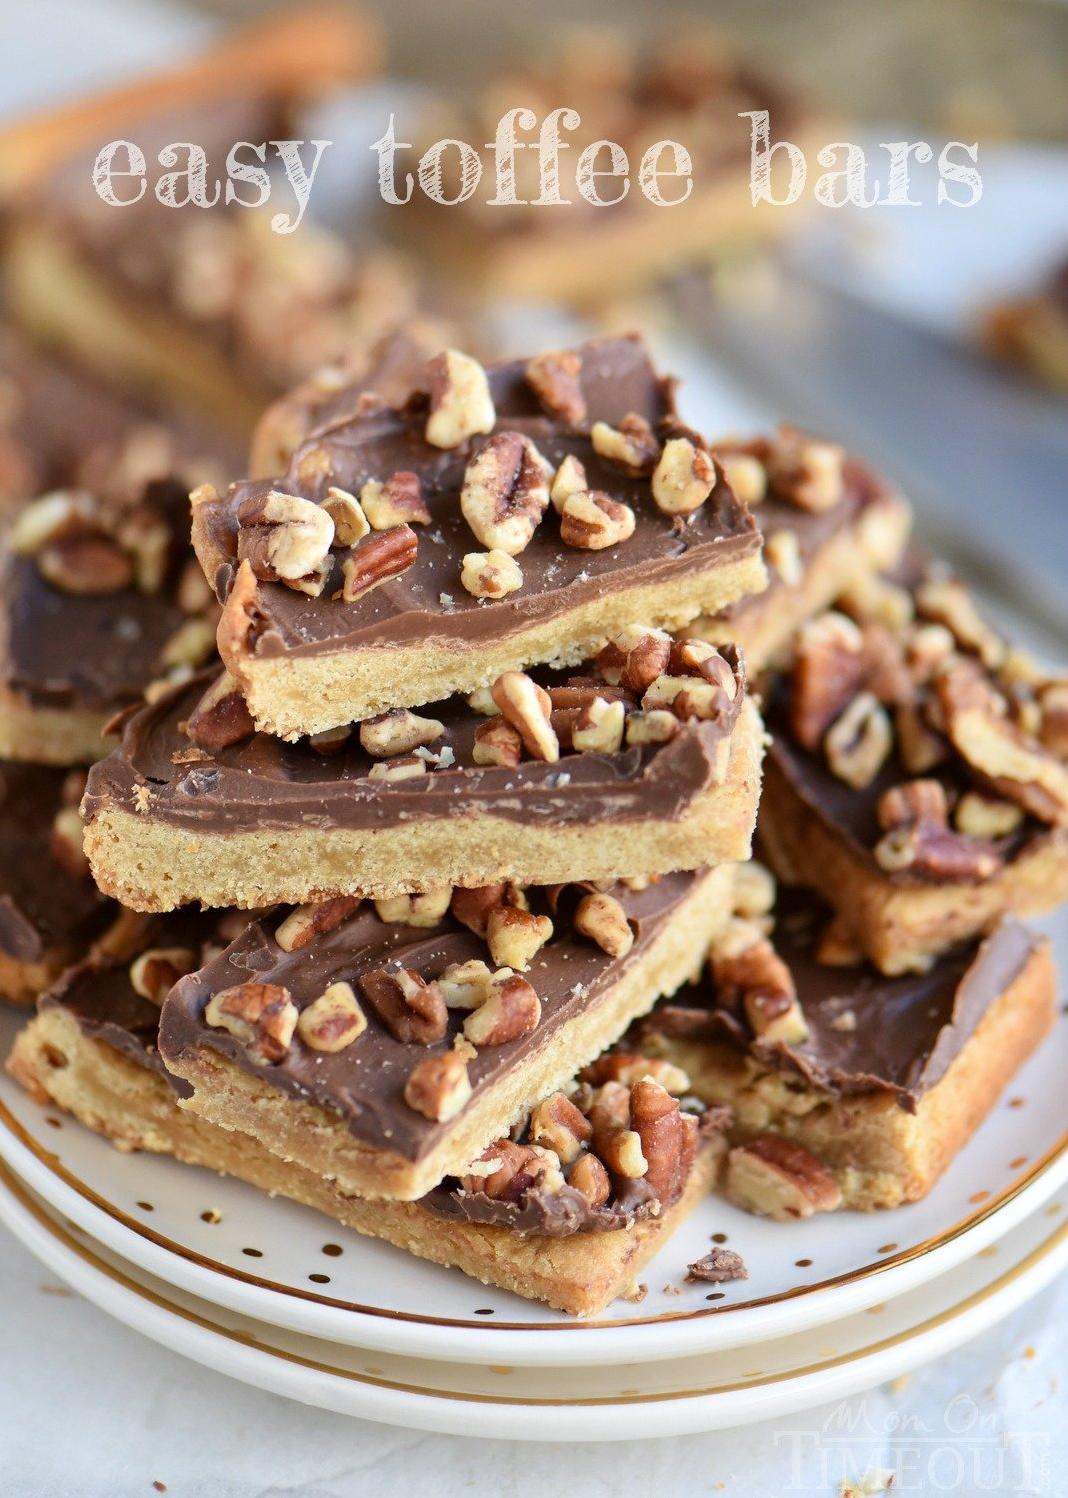  Bring on the sweetness with this decadent chocolate toffee recipe.